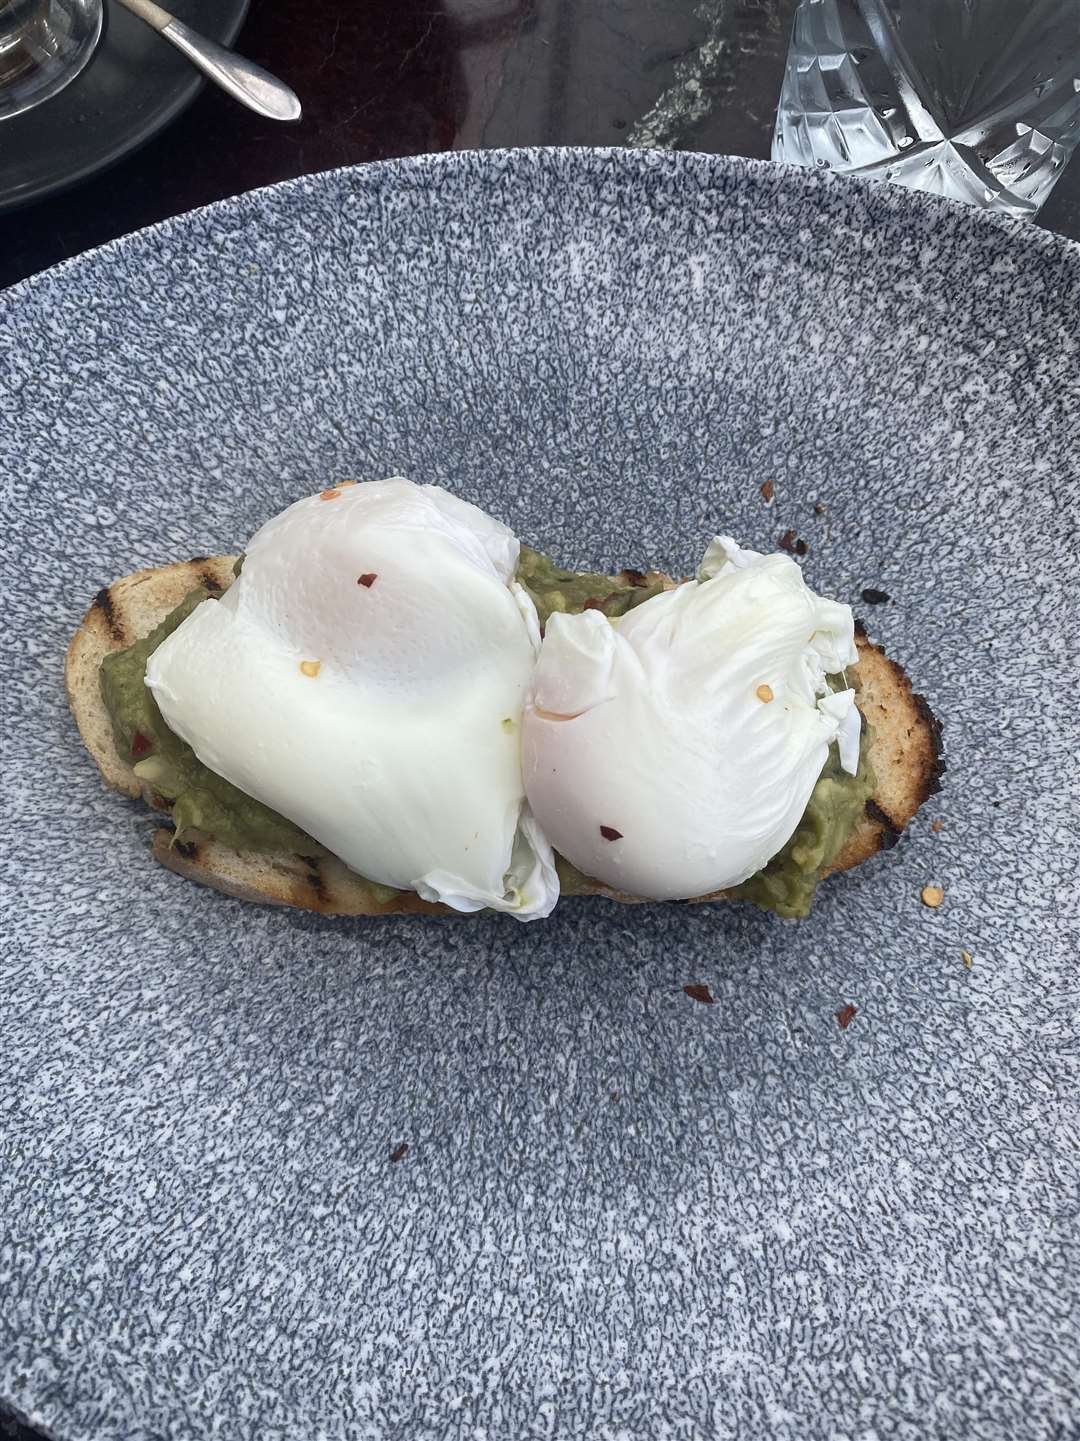 Breakfast of delicious avocado and egg.